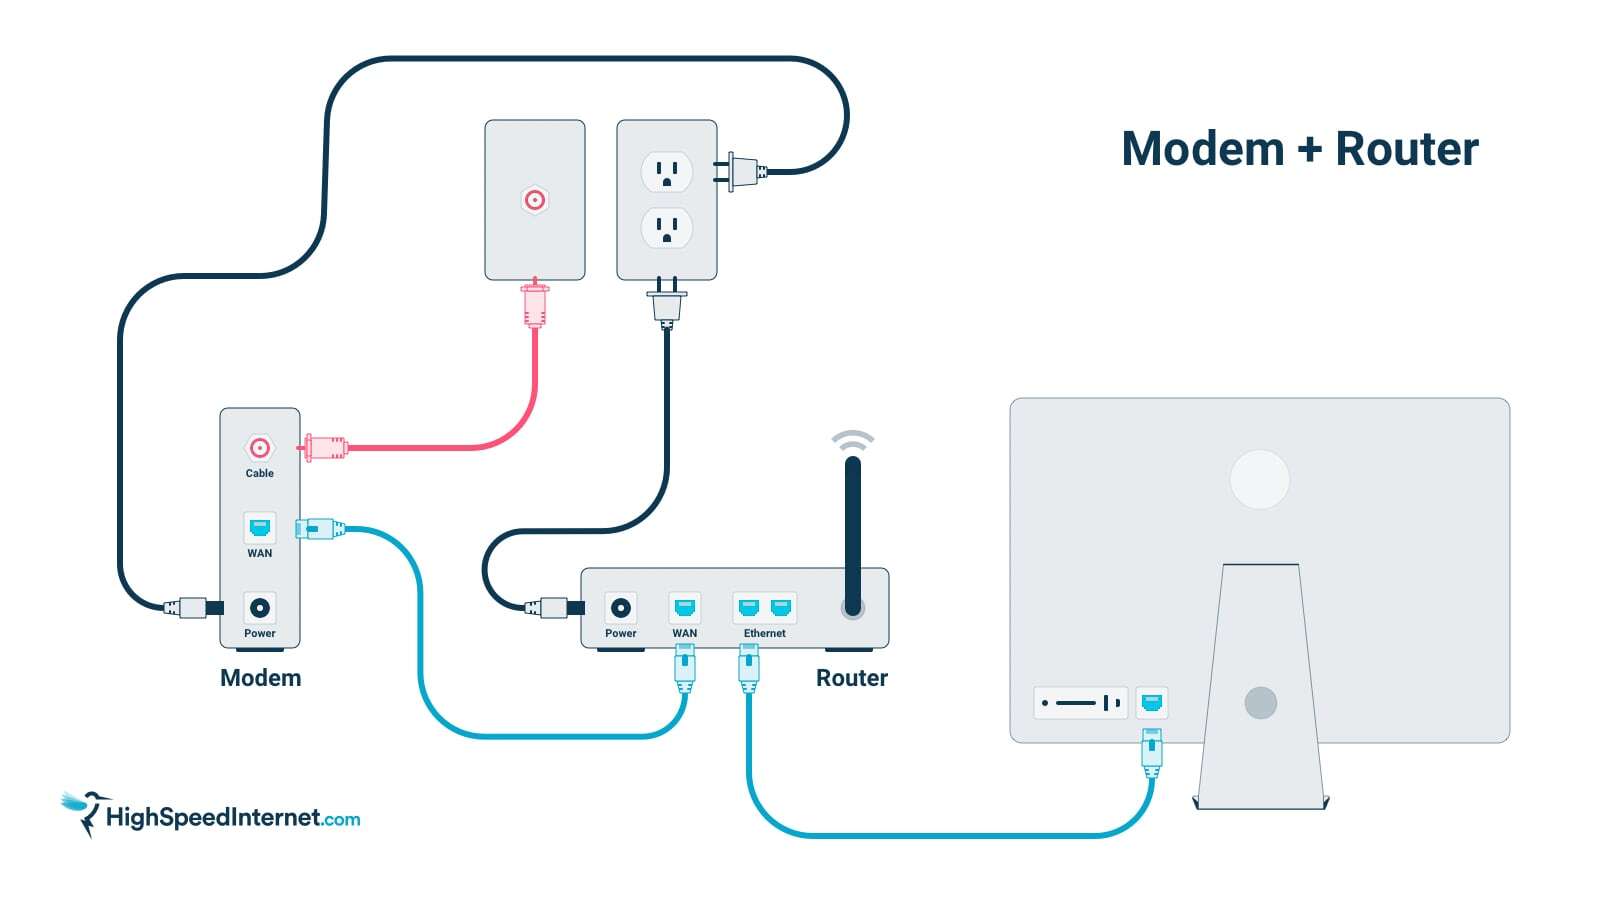 Ensure that the Ethernet cable or Wi-Fi connection is properly connected.
Restart the router and modem.